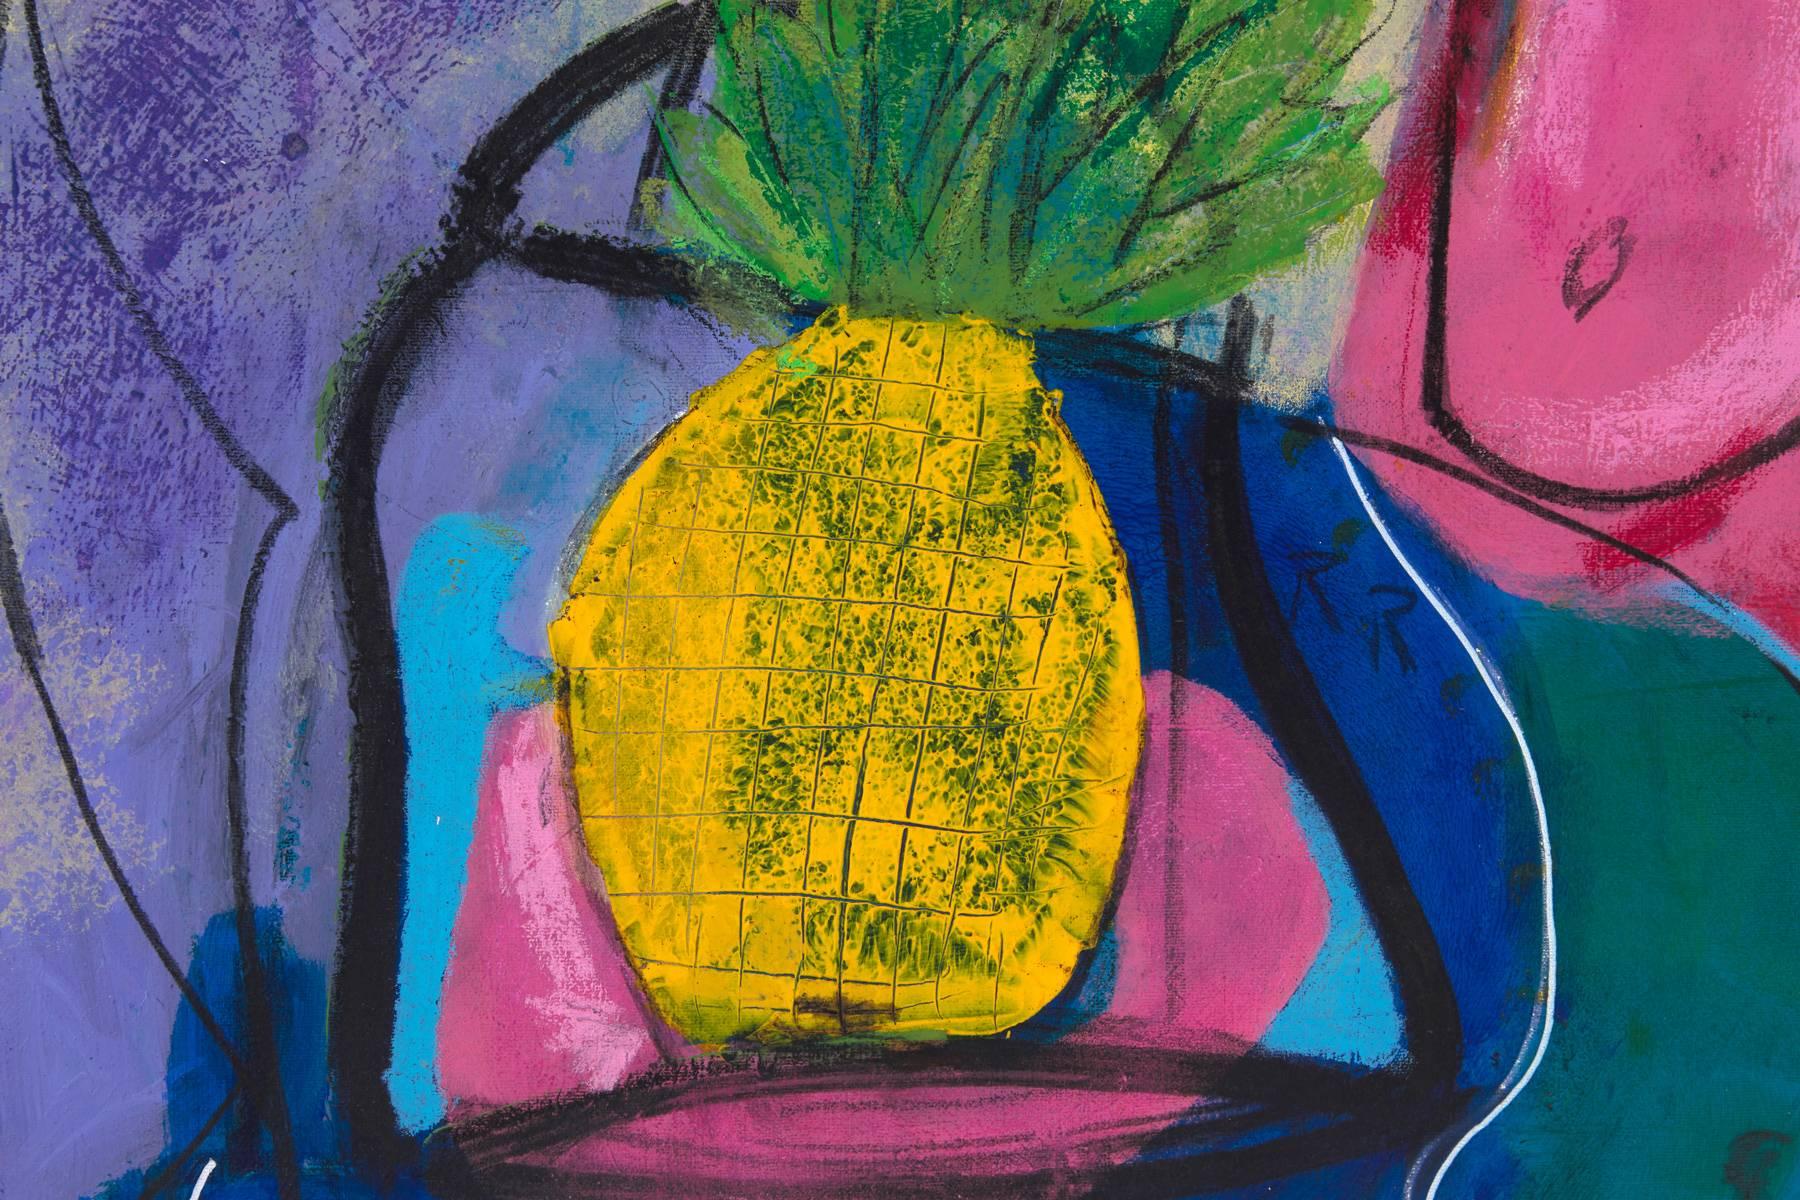 This one-of-a-kind Original comes ready-to-hang and signed by Frank Schroeder:
77X57 inches
195x145 cm

_________________________________

Materials:
Acrylic Painting, Dry And Oil Pastels On Canvas



Keywords: Pineapple Infinite, Abstract,